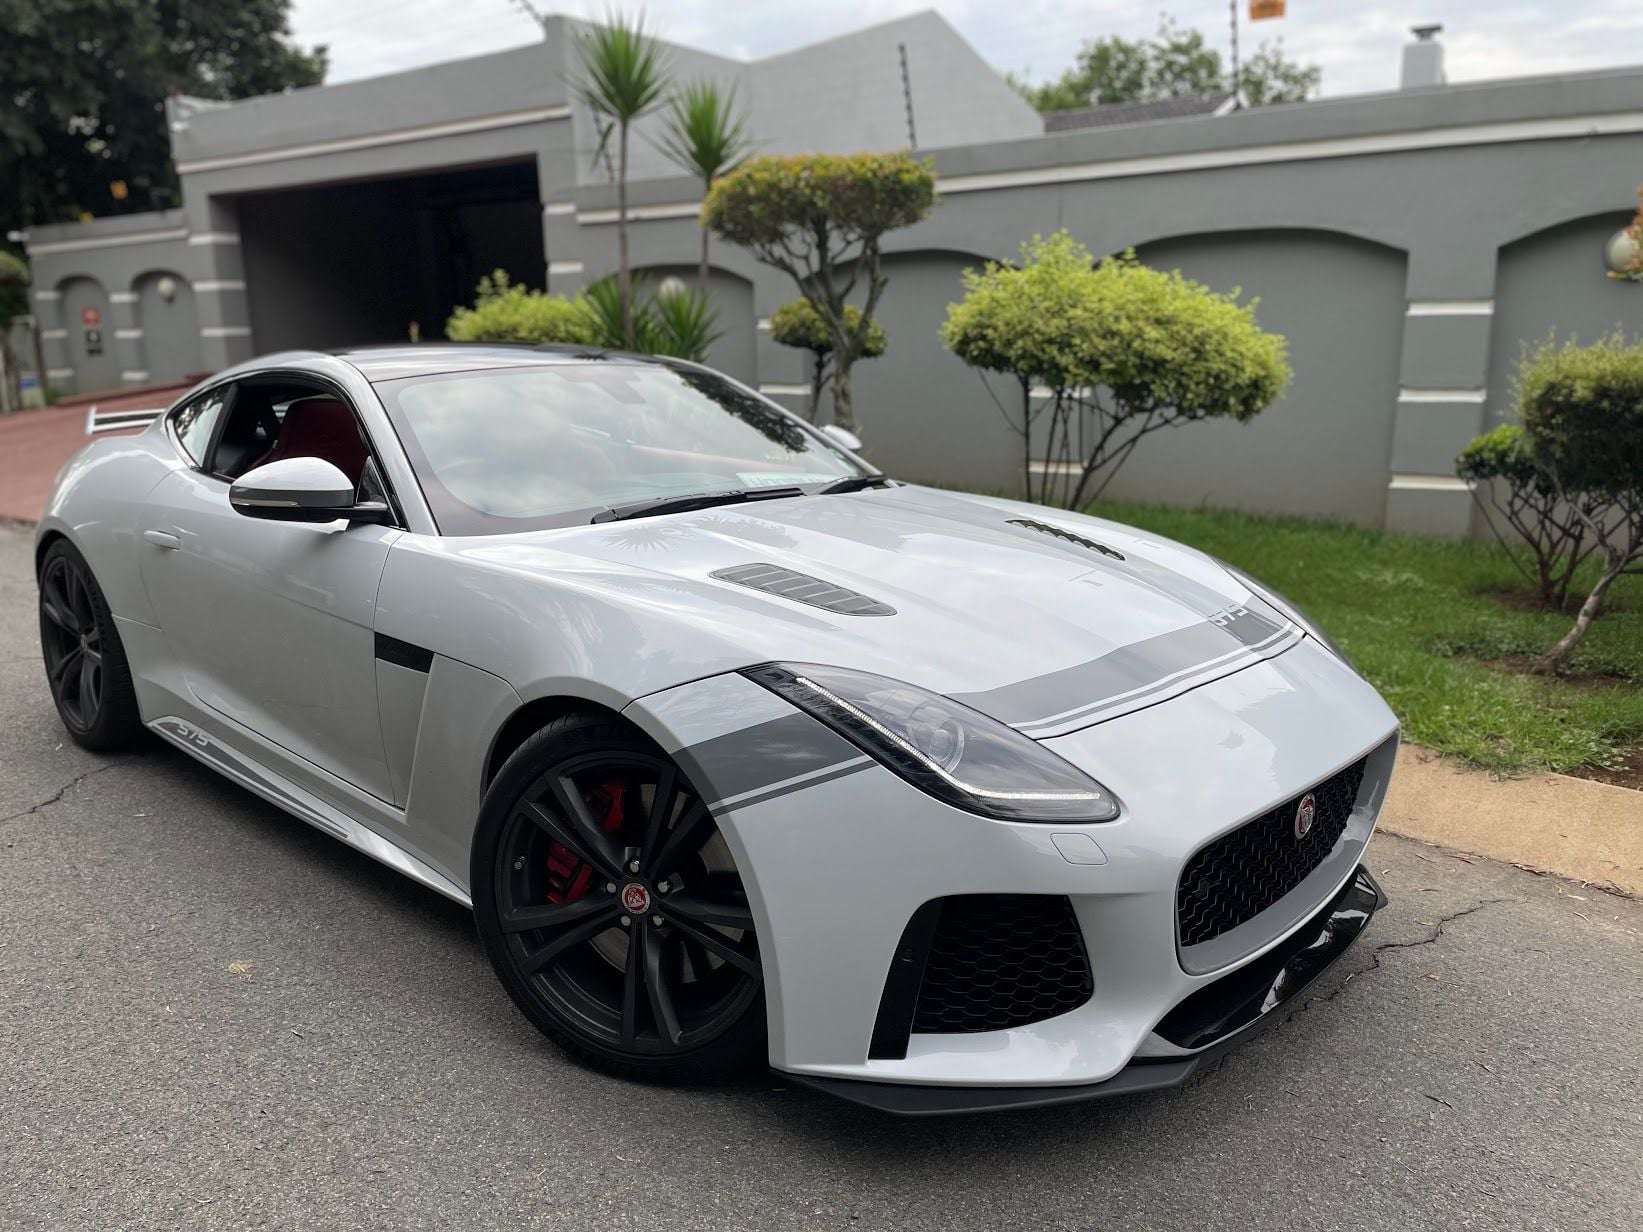 Miscellaneous - F-Type modifications - Used - 2013 to 2020 Jaguar F-Type - Johannesburg, South Africa